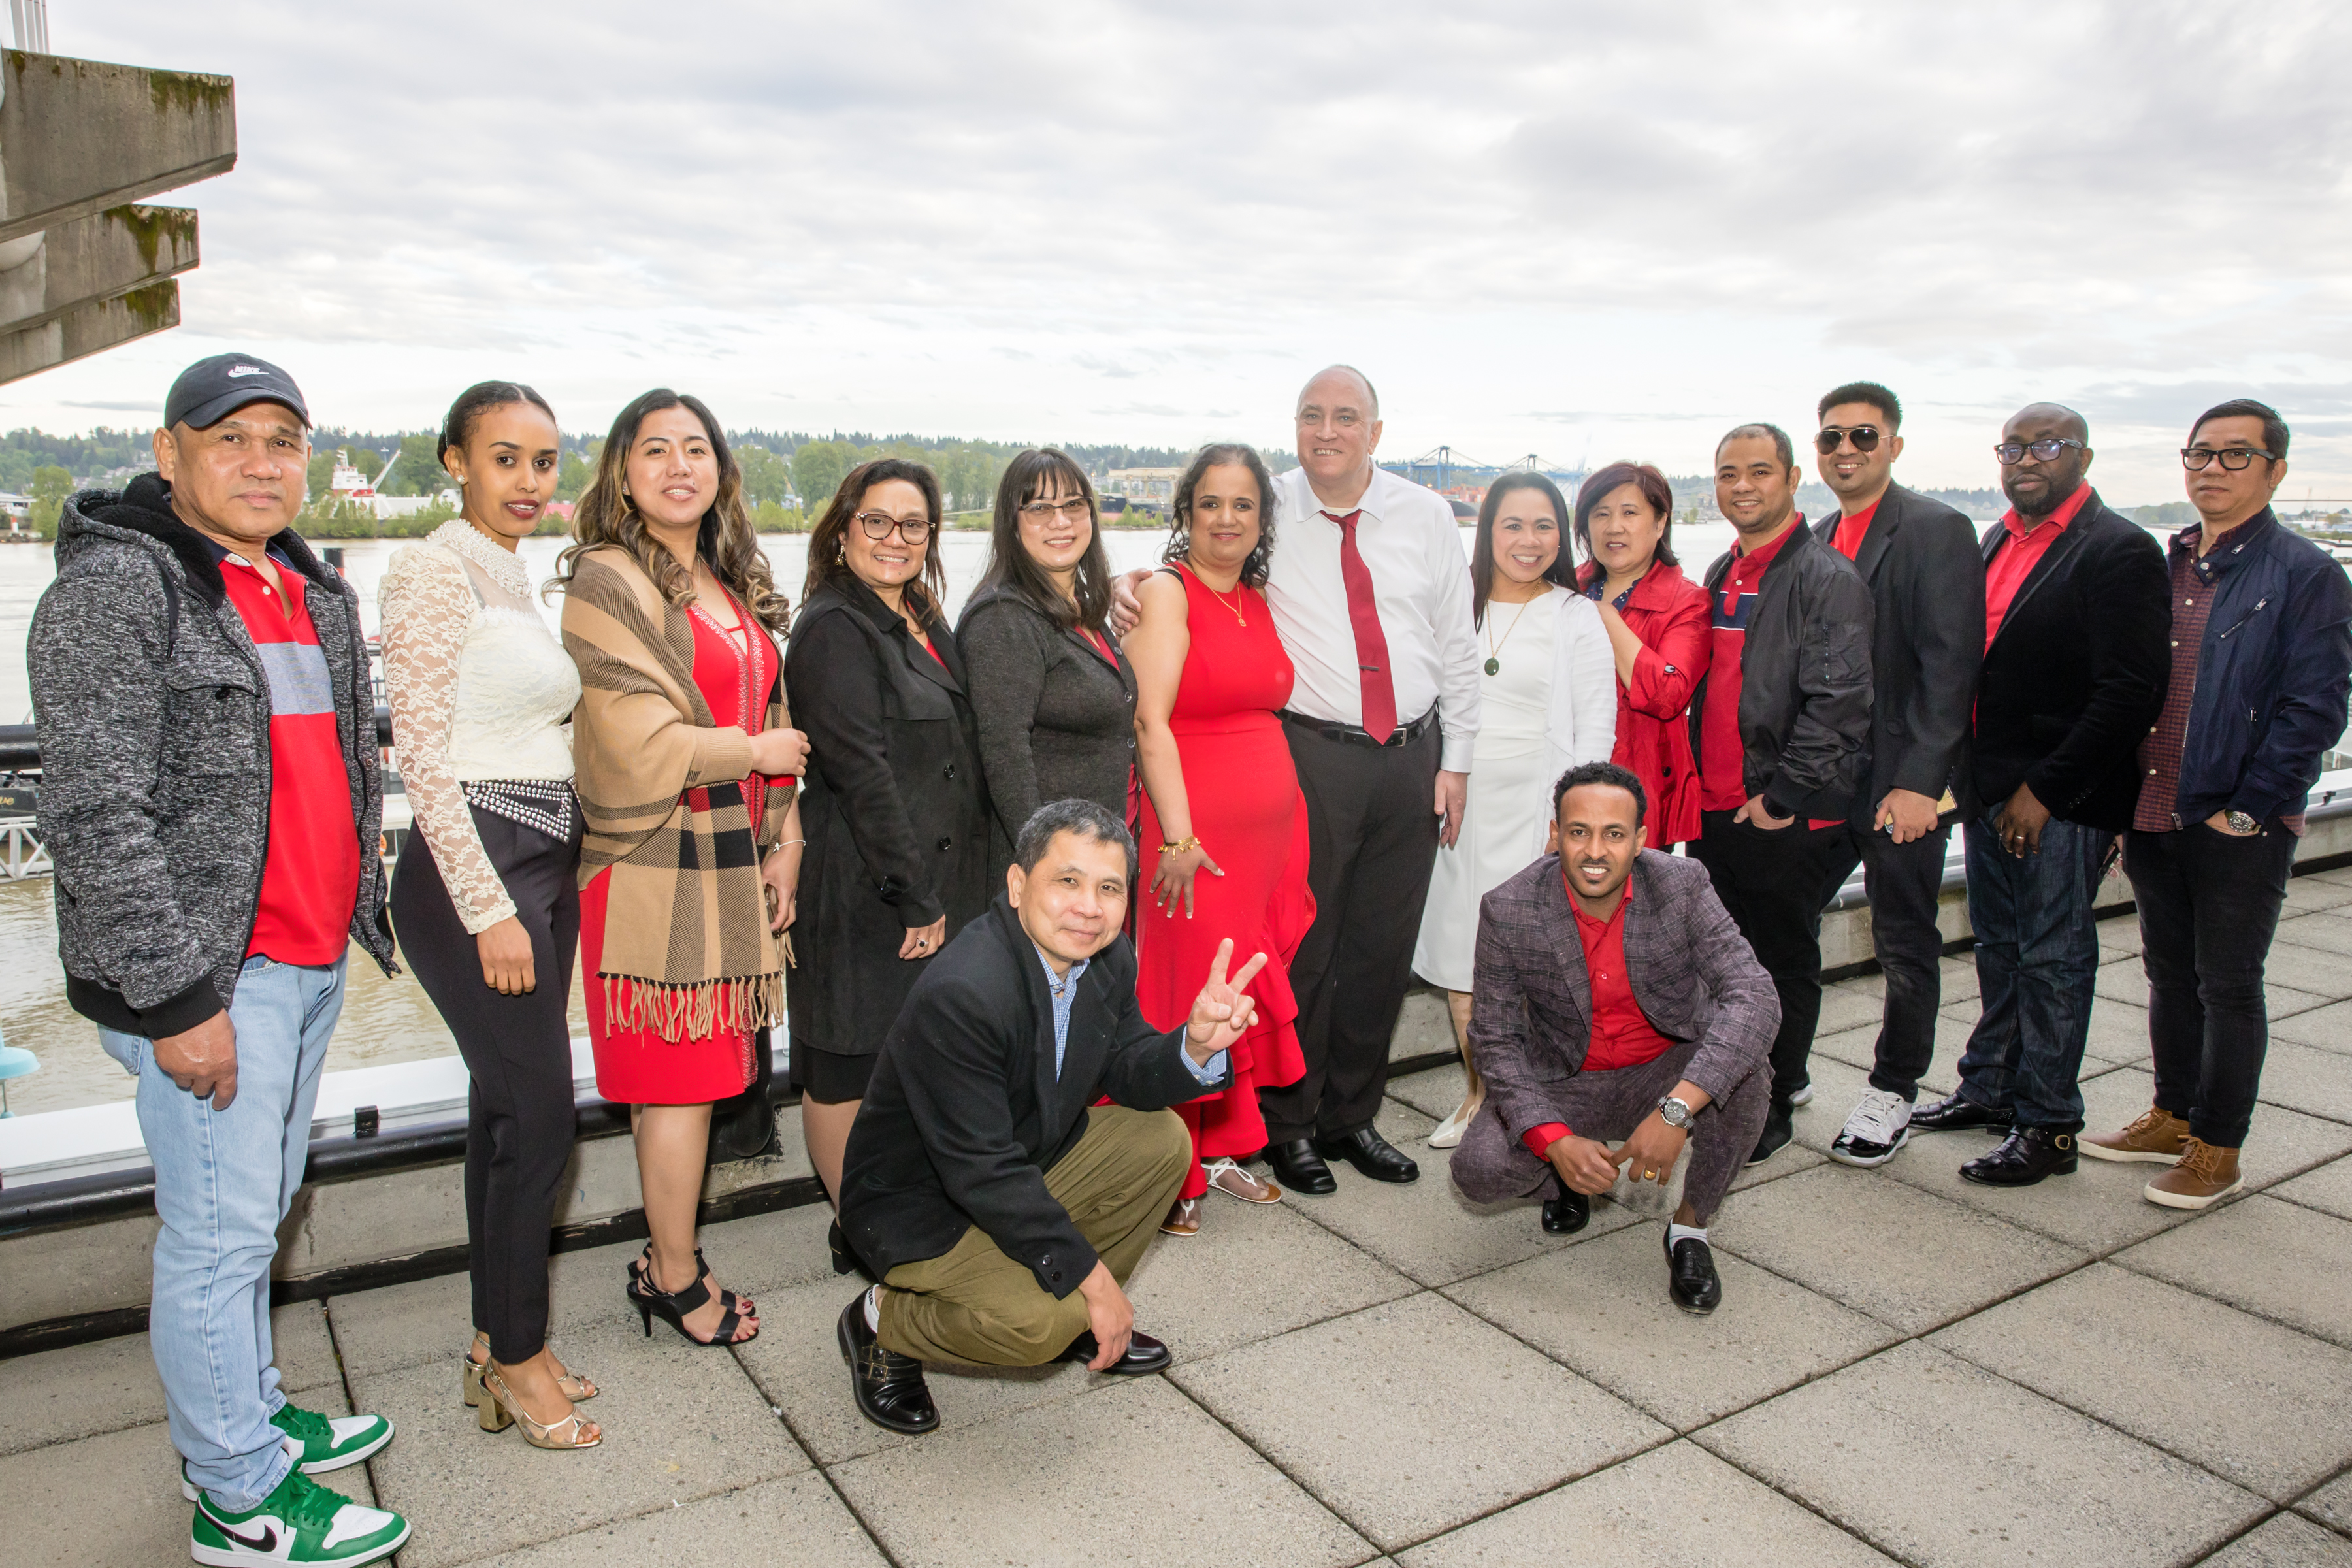 Kristy, in a long red dress, stands with a group of her students on a hotel balcony with the Fraser River behind them. Everyone is in formal wear and smiles at the camera.